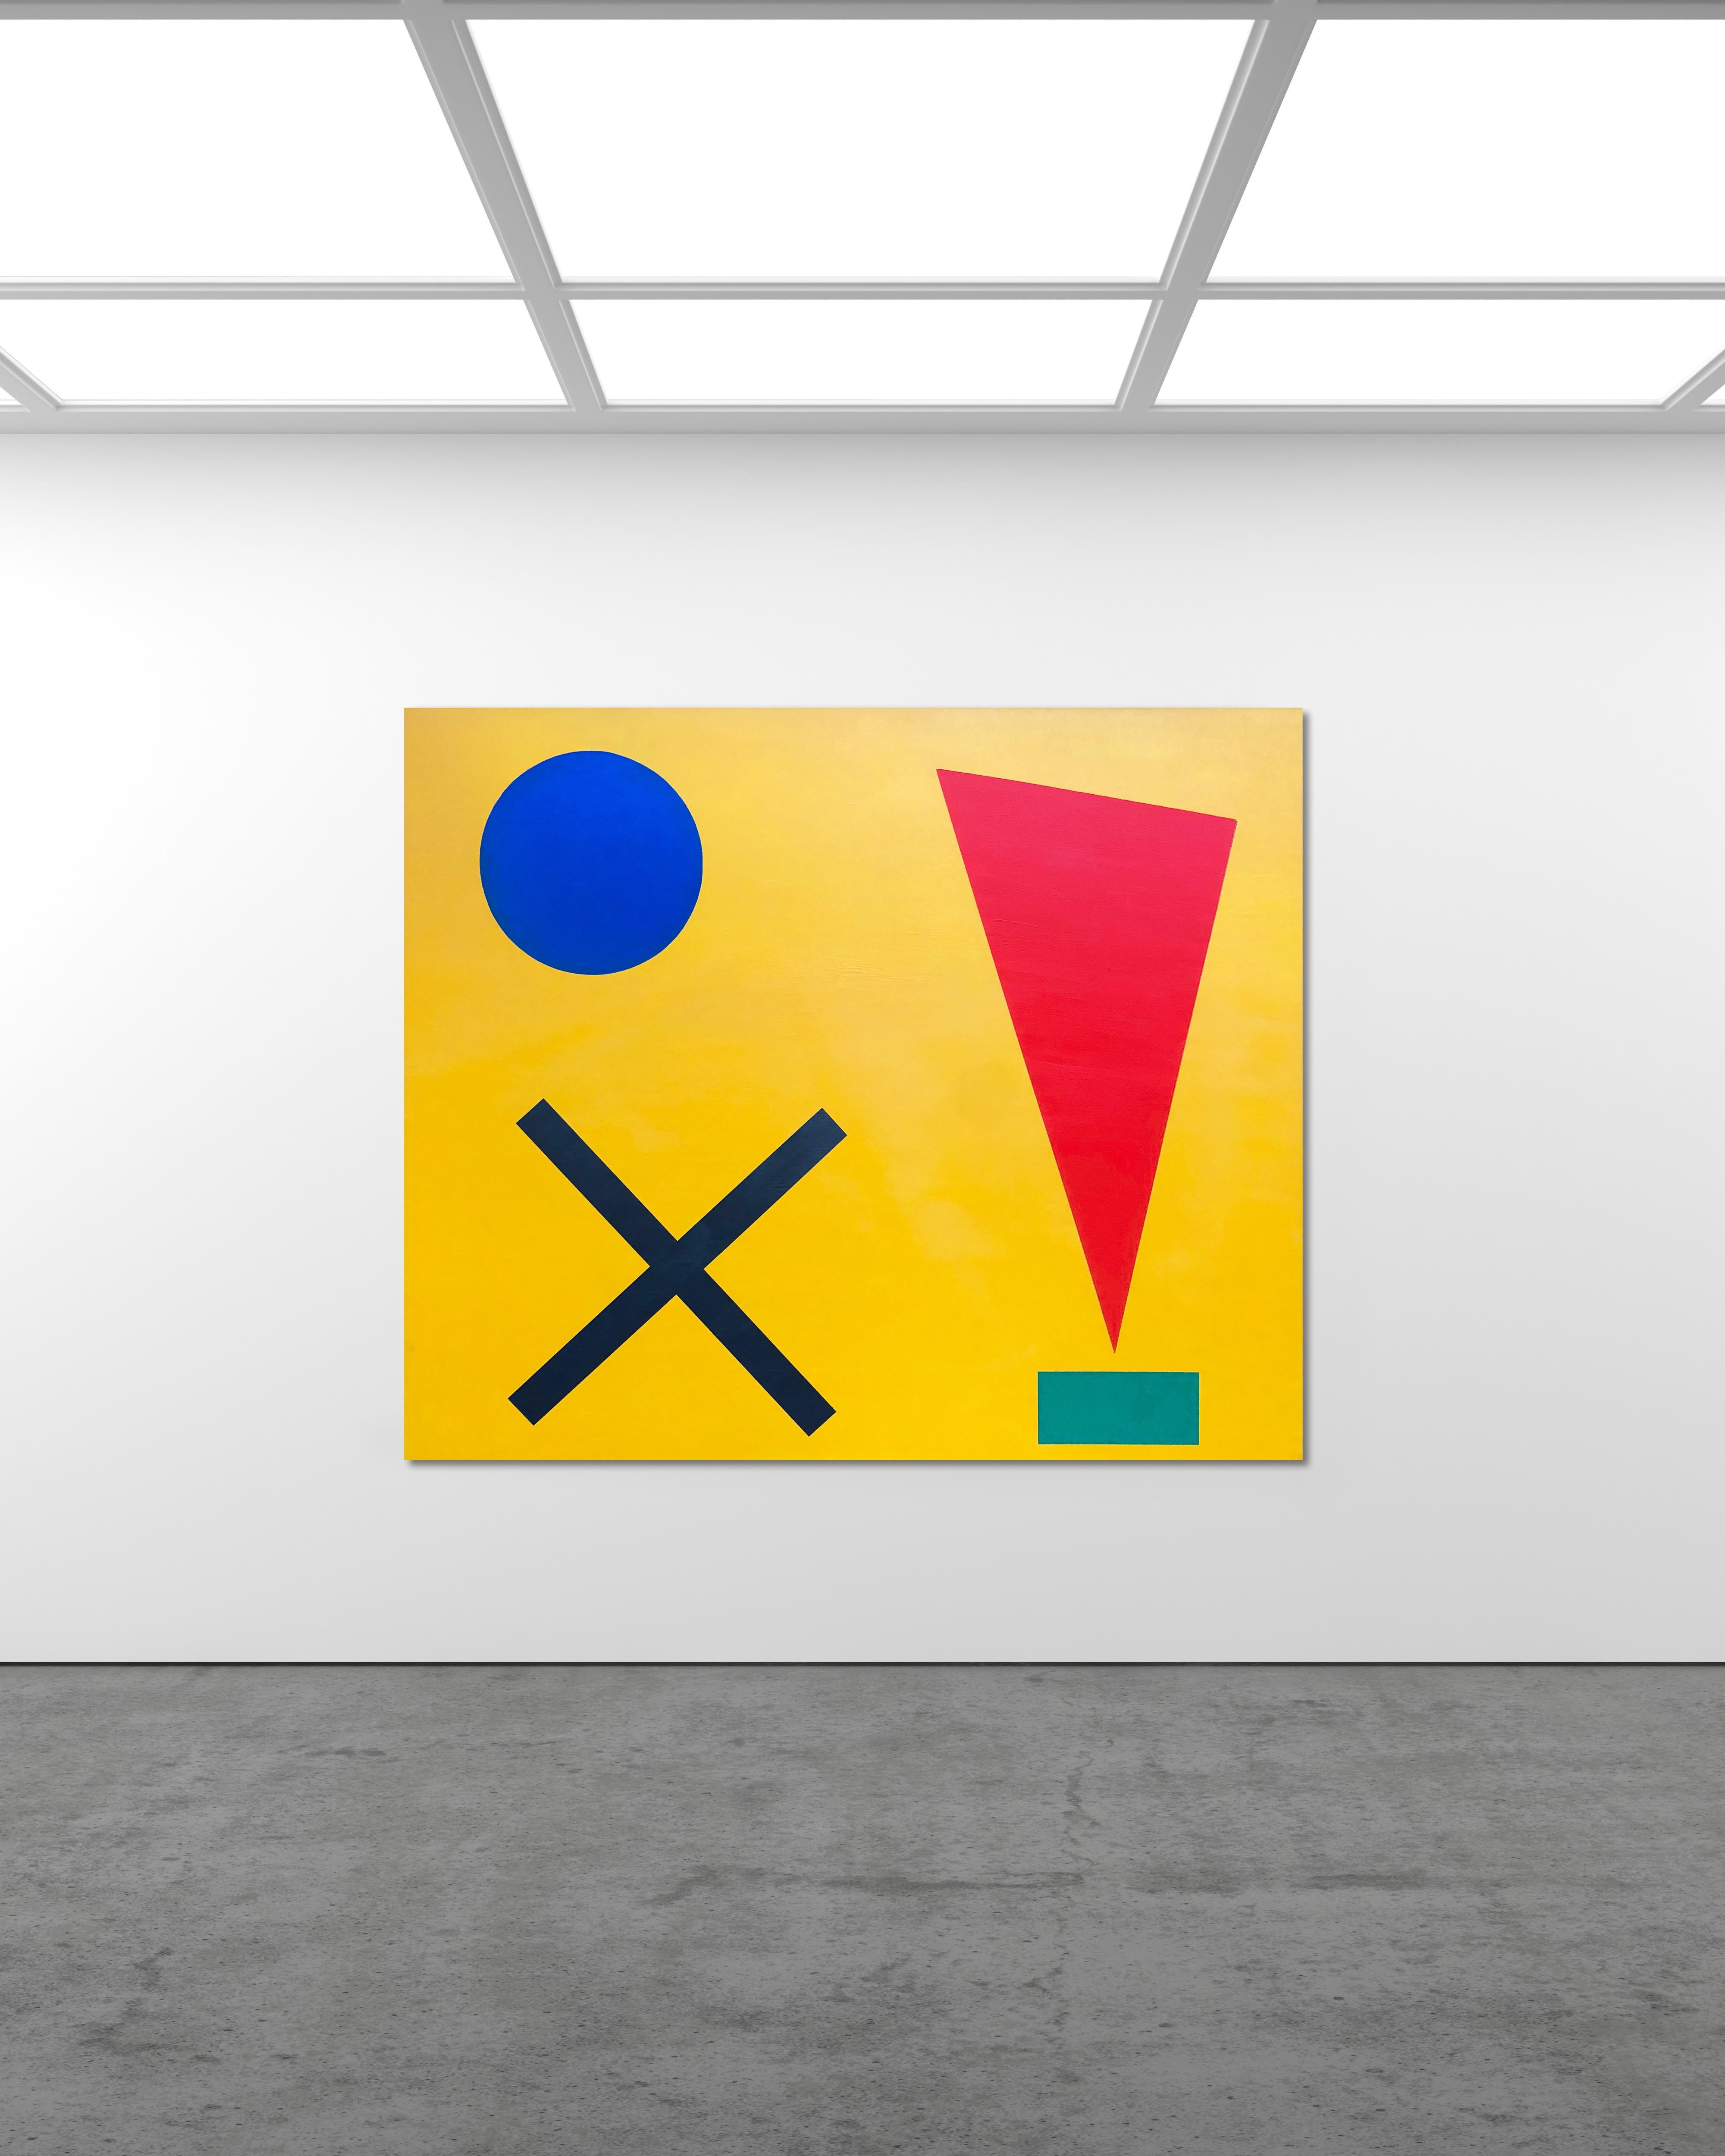 The painting's name is a direct depiction of the imagery you see. X-Marks The Spot is an abstract geometric in the simplest terms. A large yellow background pops against the strong-coloured geometric forms that depict the title of the painting. A